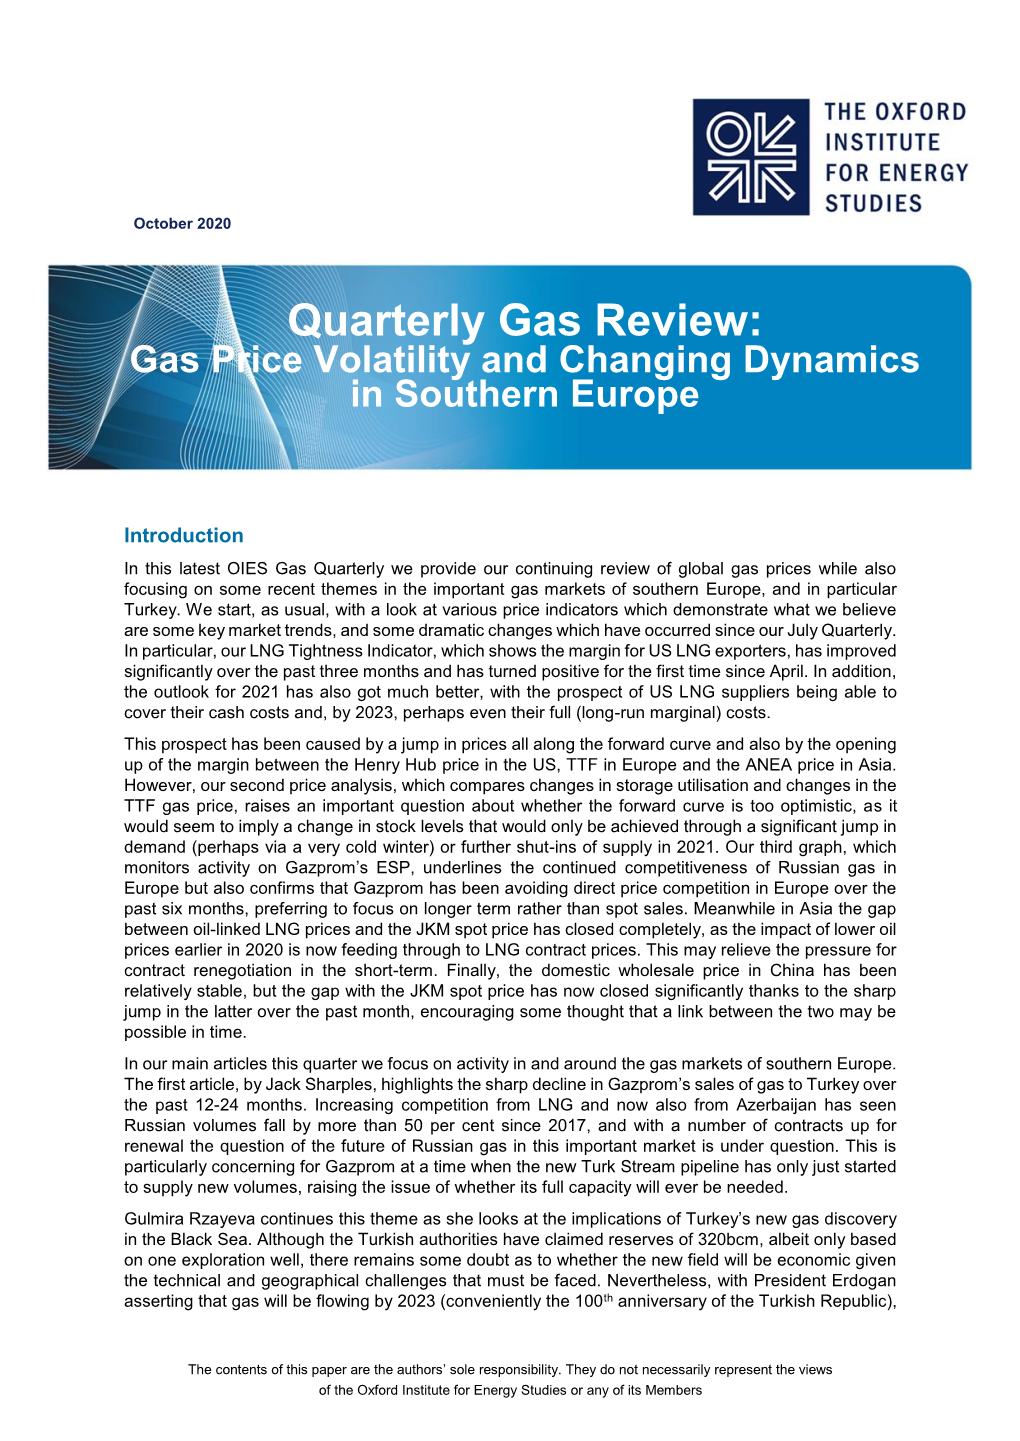 Quarterly Gas Review: Gas Price Volatility and Changing Dynamics in Southern Europe